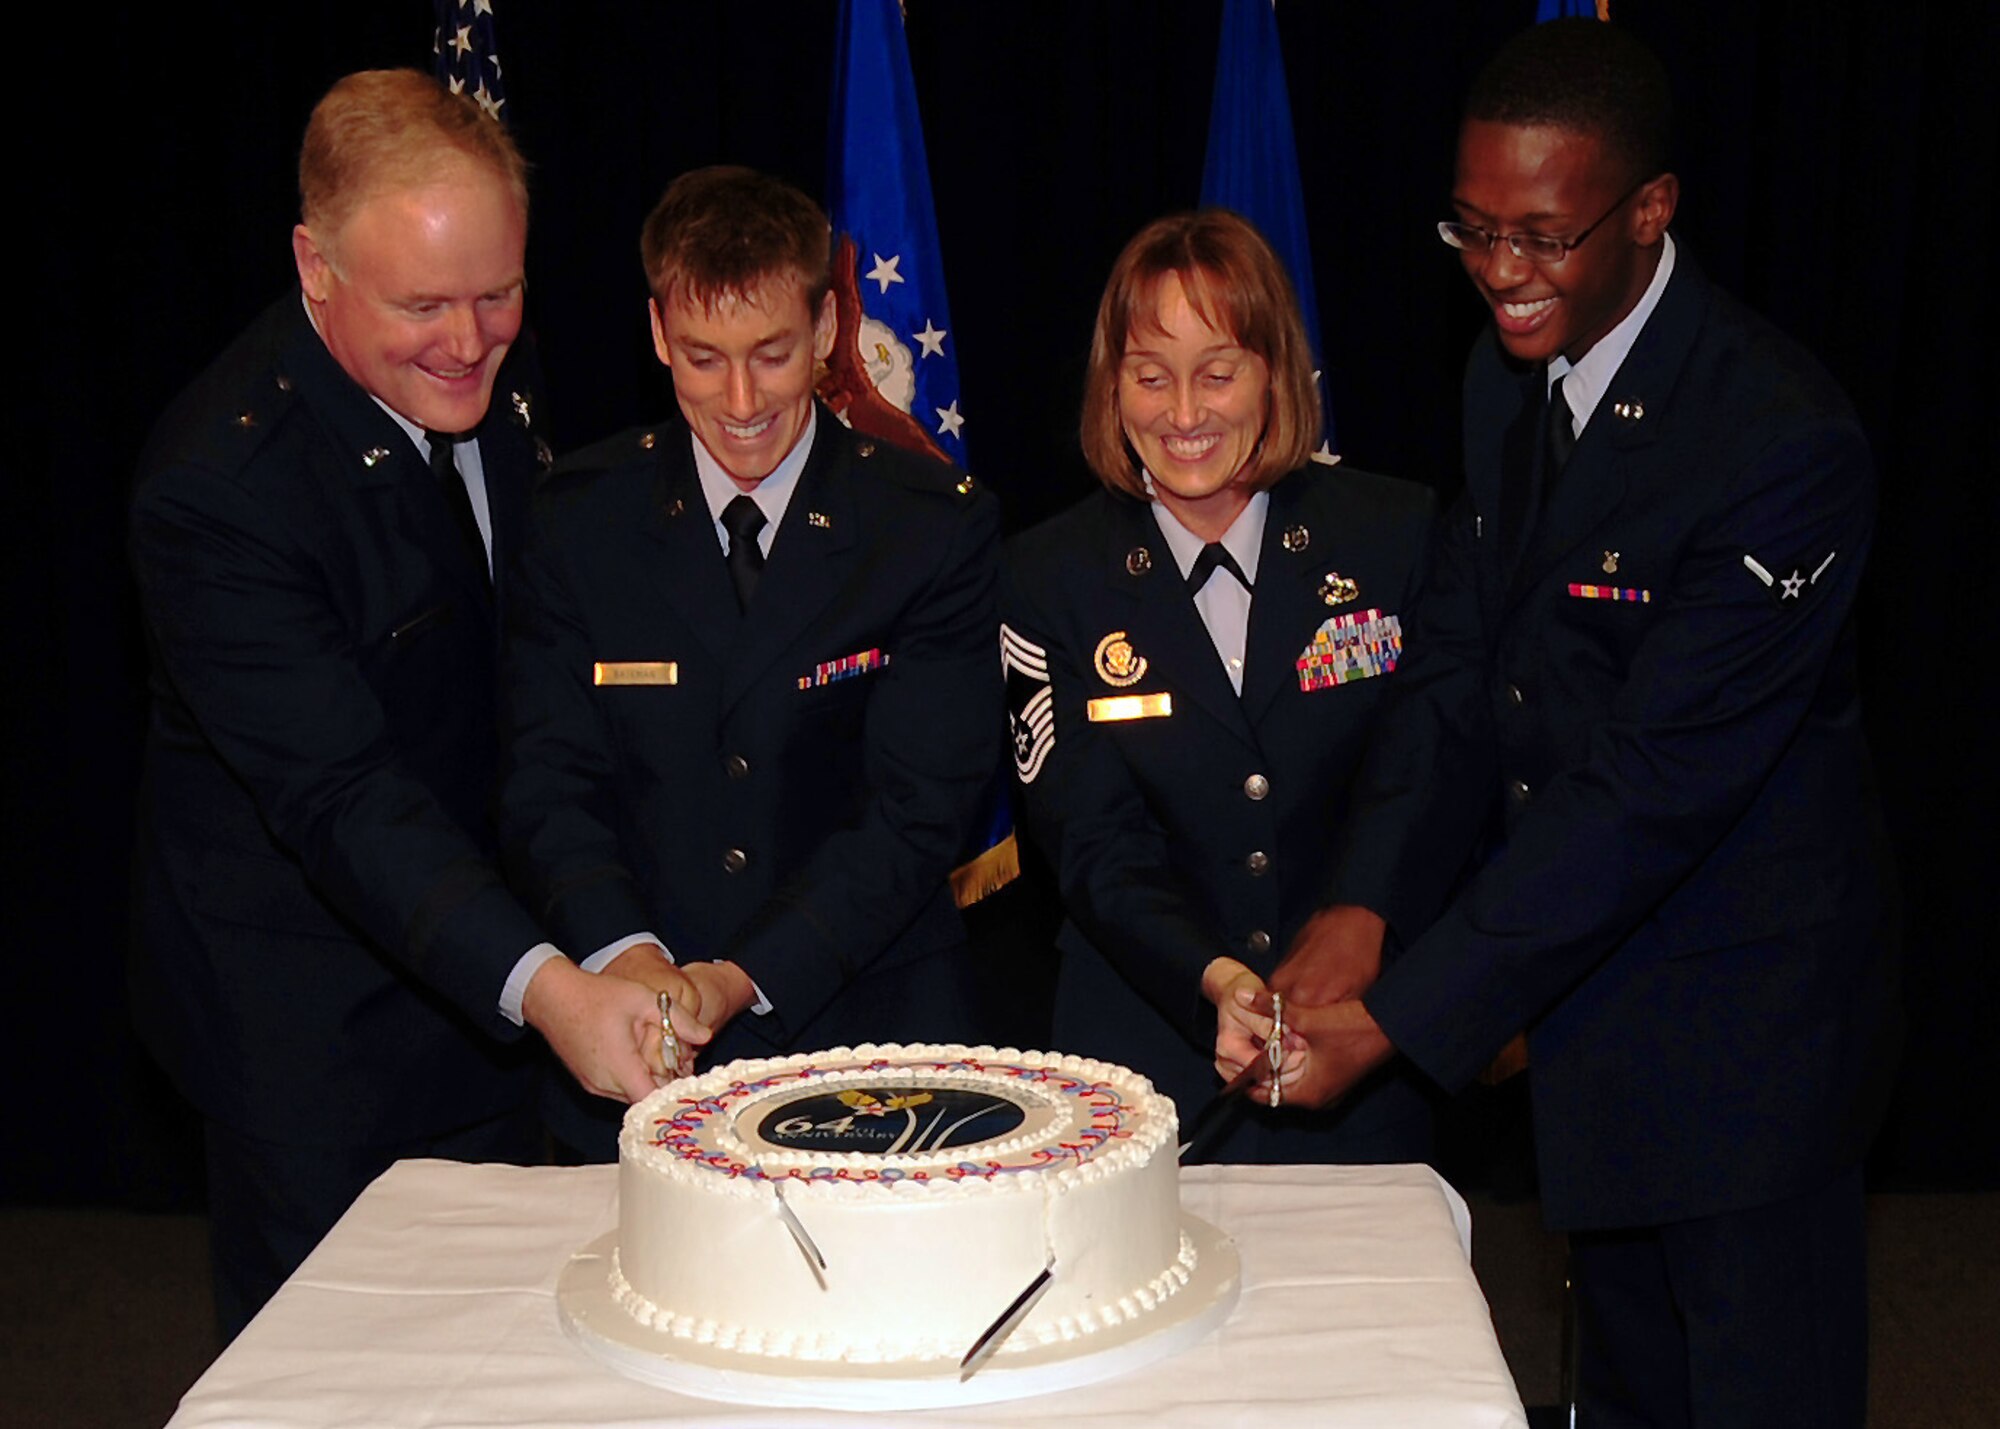 Brig. Gen. Roger Teague, SMC vice commander, and Chief Master Sgt. Vicki Robinson are joined by Los Angeles AFB’s youngest officer and enlisted members for the ceremonial cake cutting marking the Air Force’s 64th birthday, Sept. 16. (Photo by Jim Gordon)